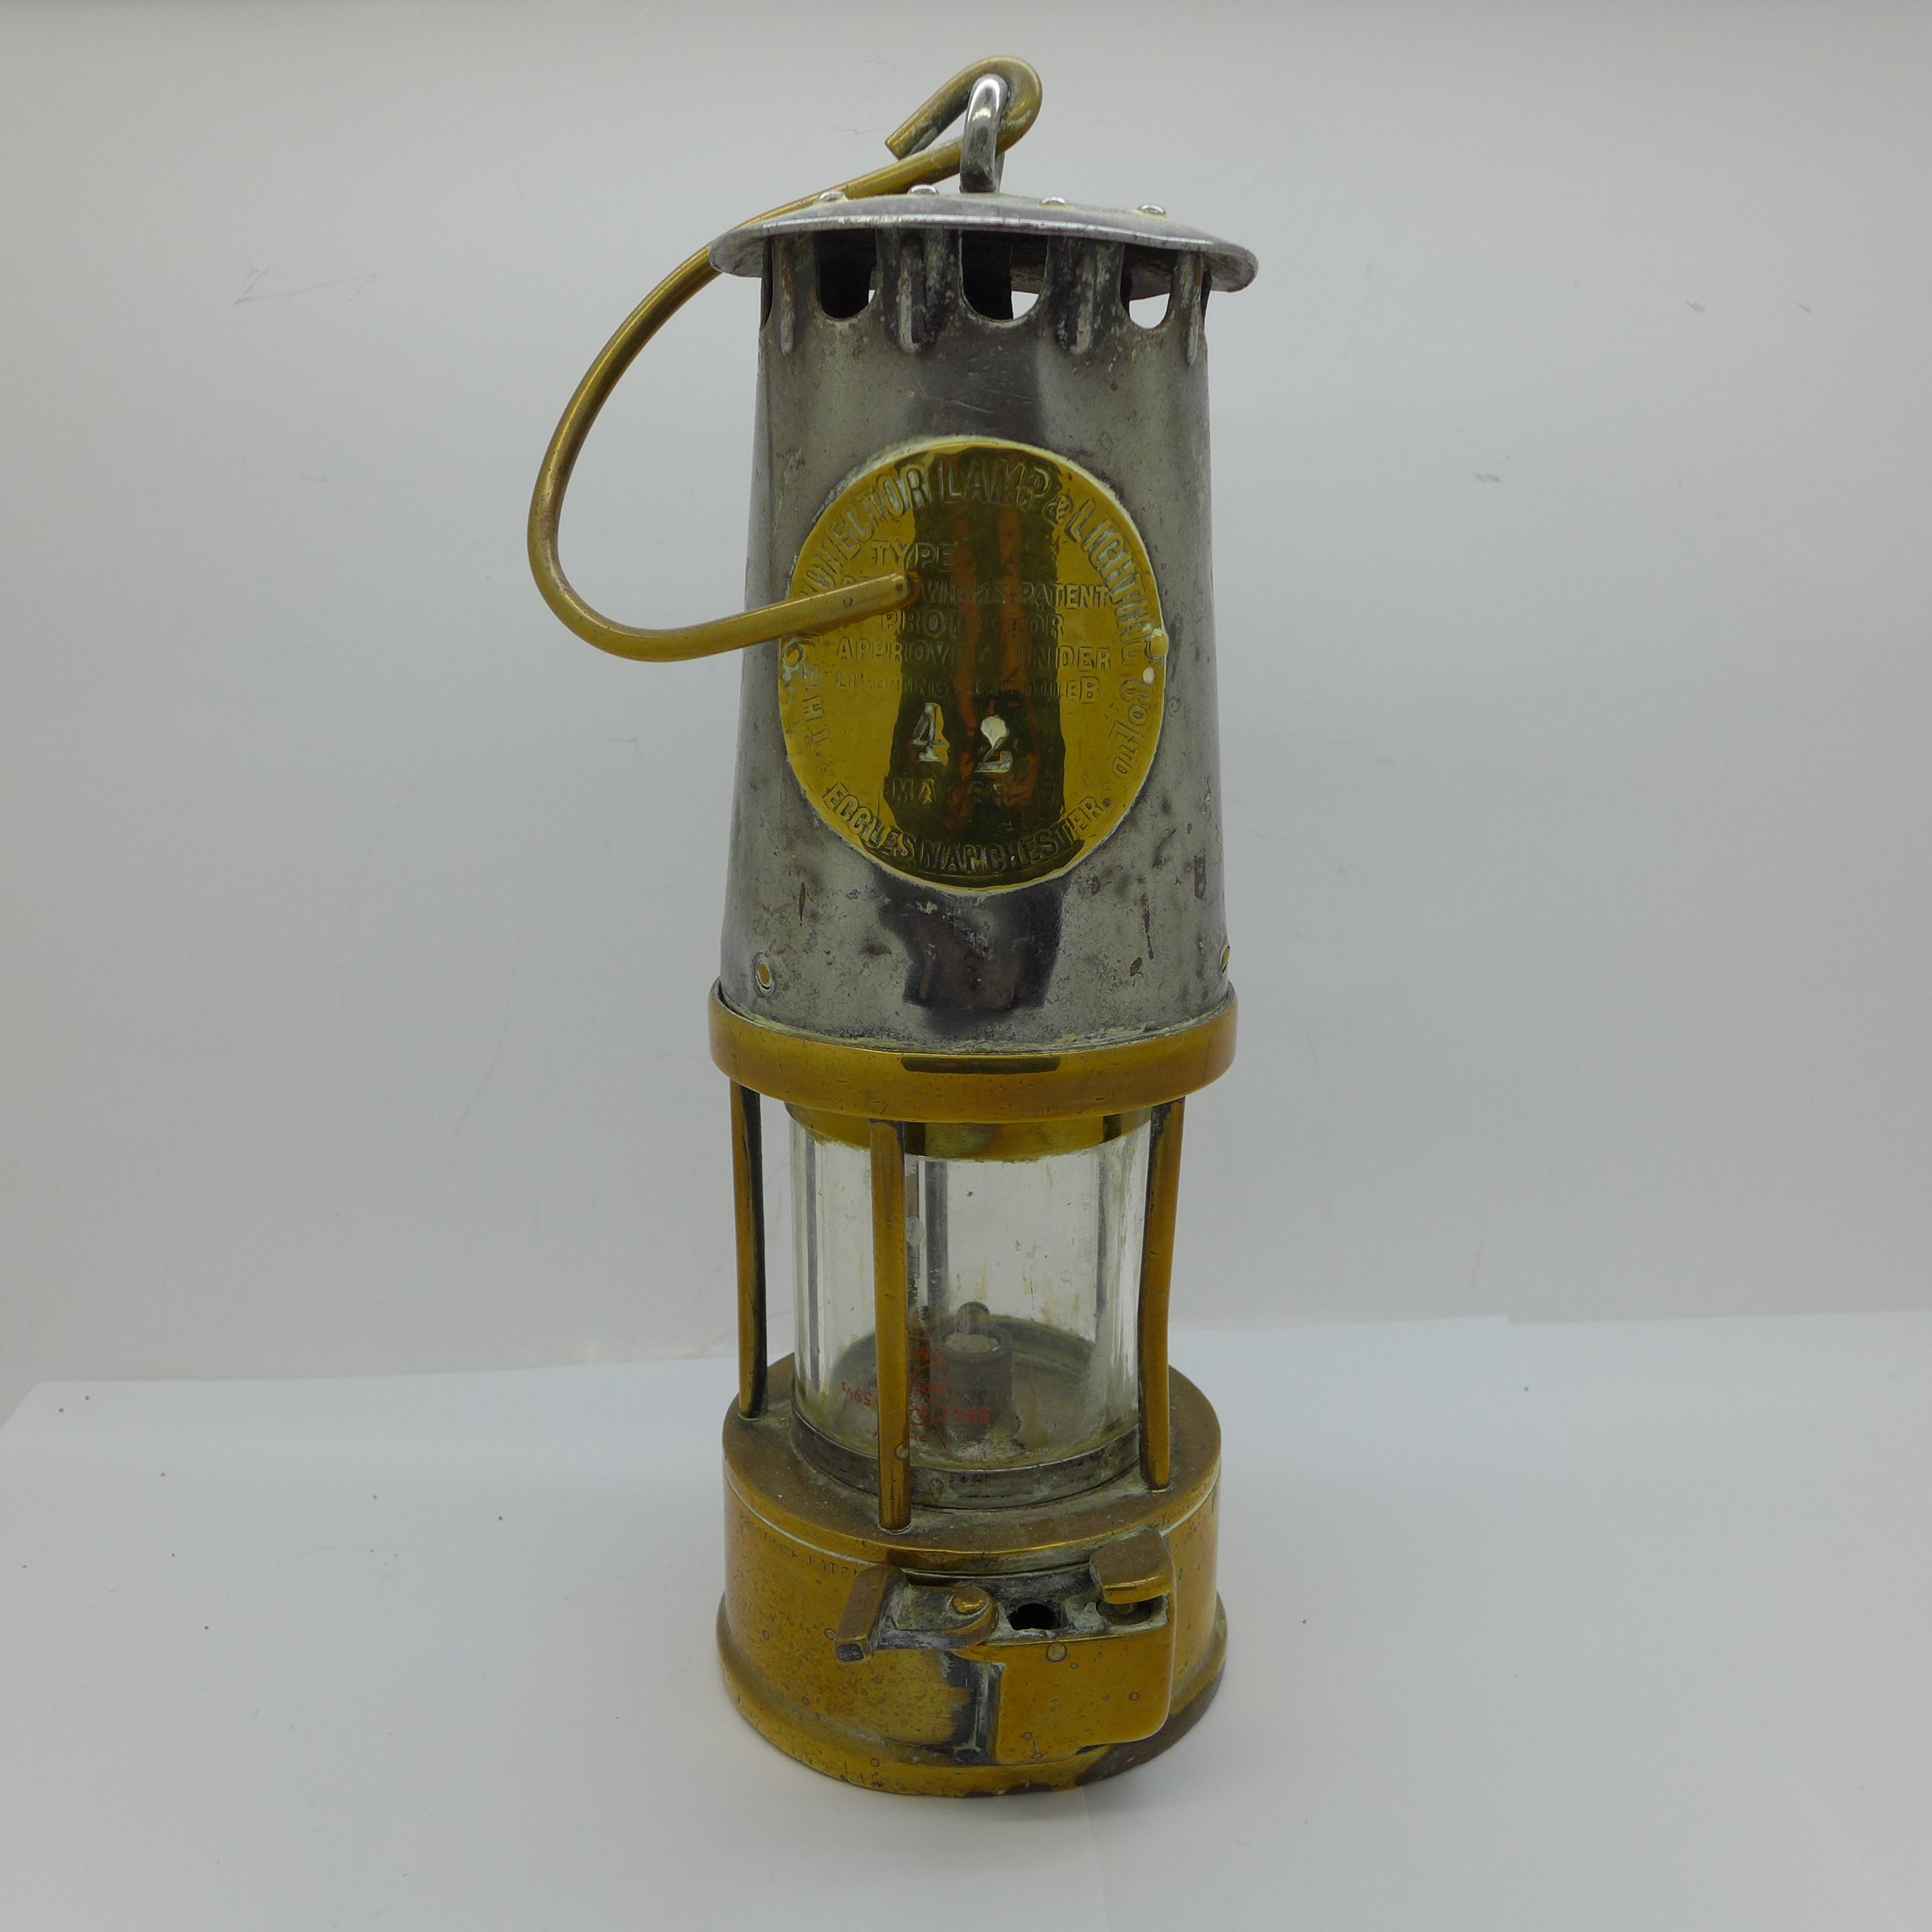 An Eccles miner's safety lamp - Image 2 of 4